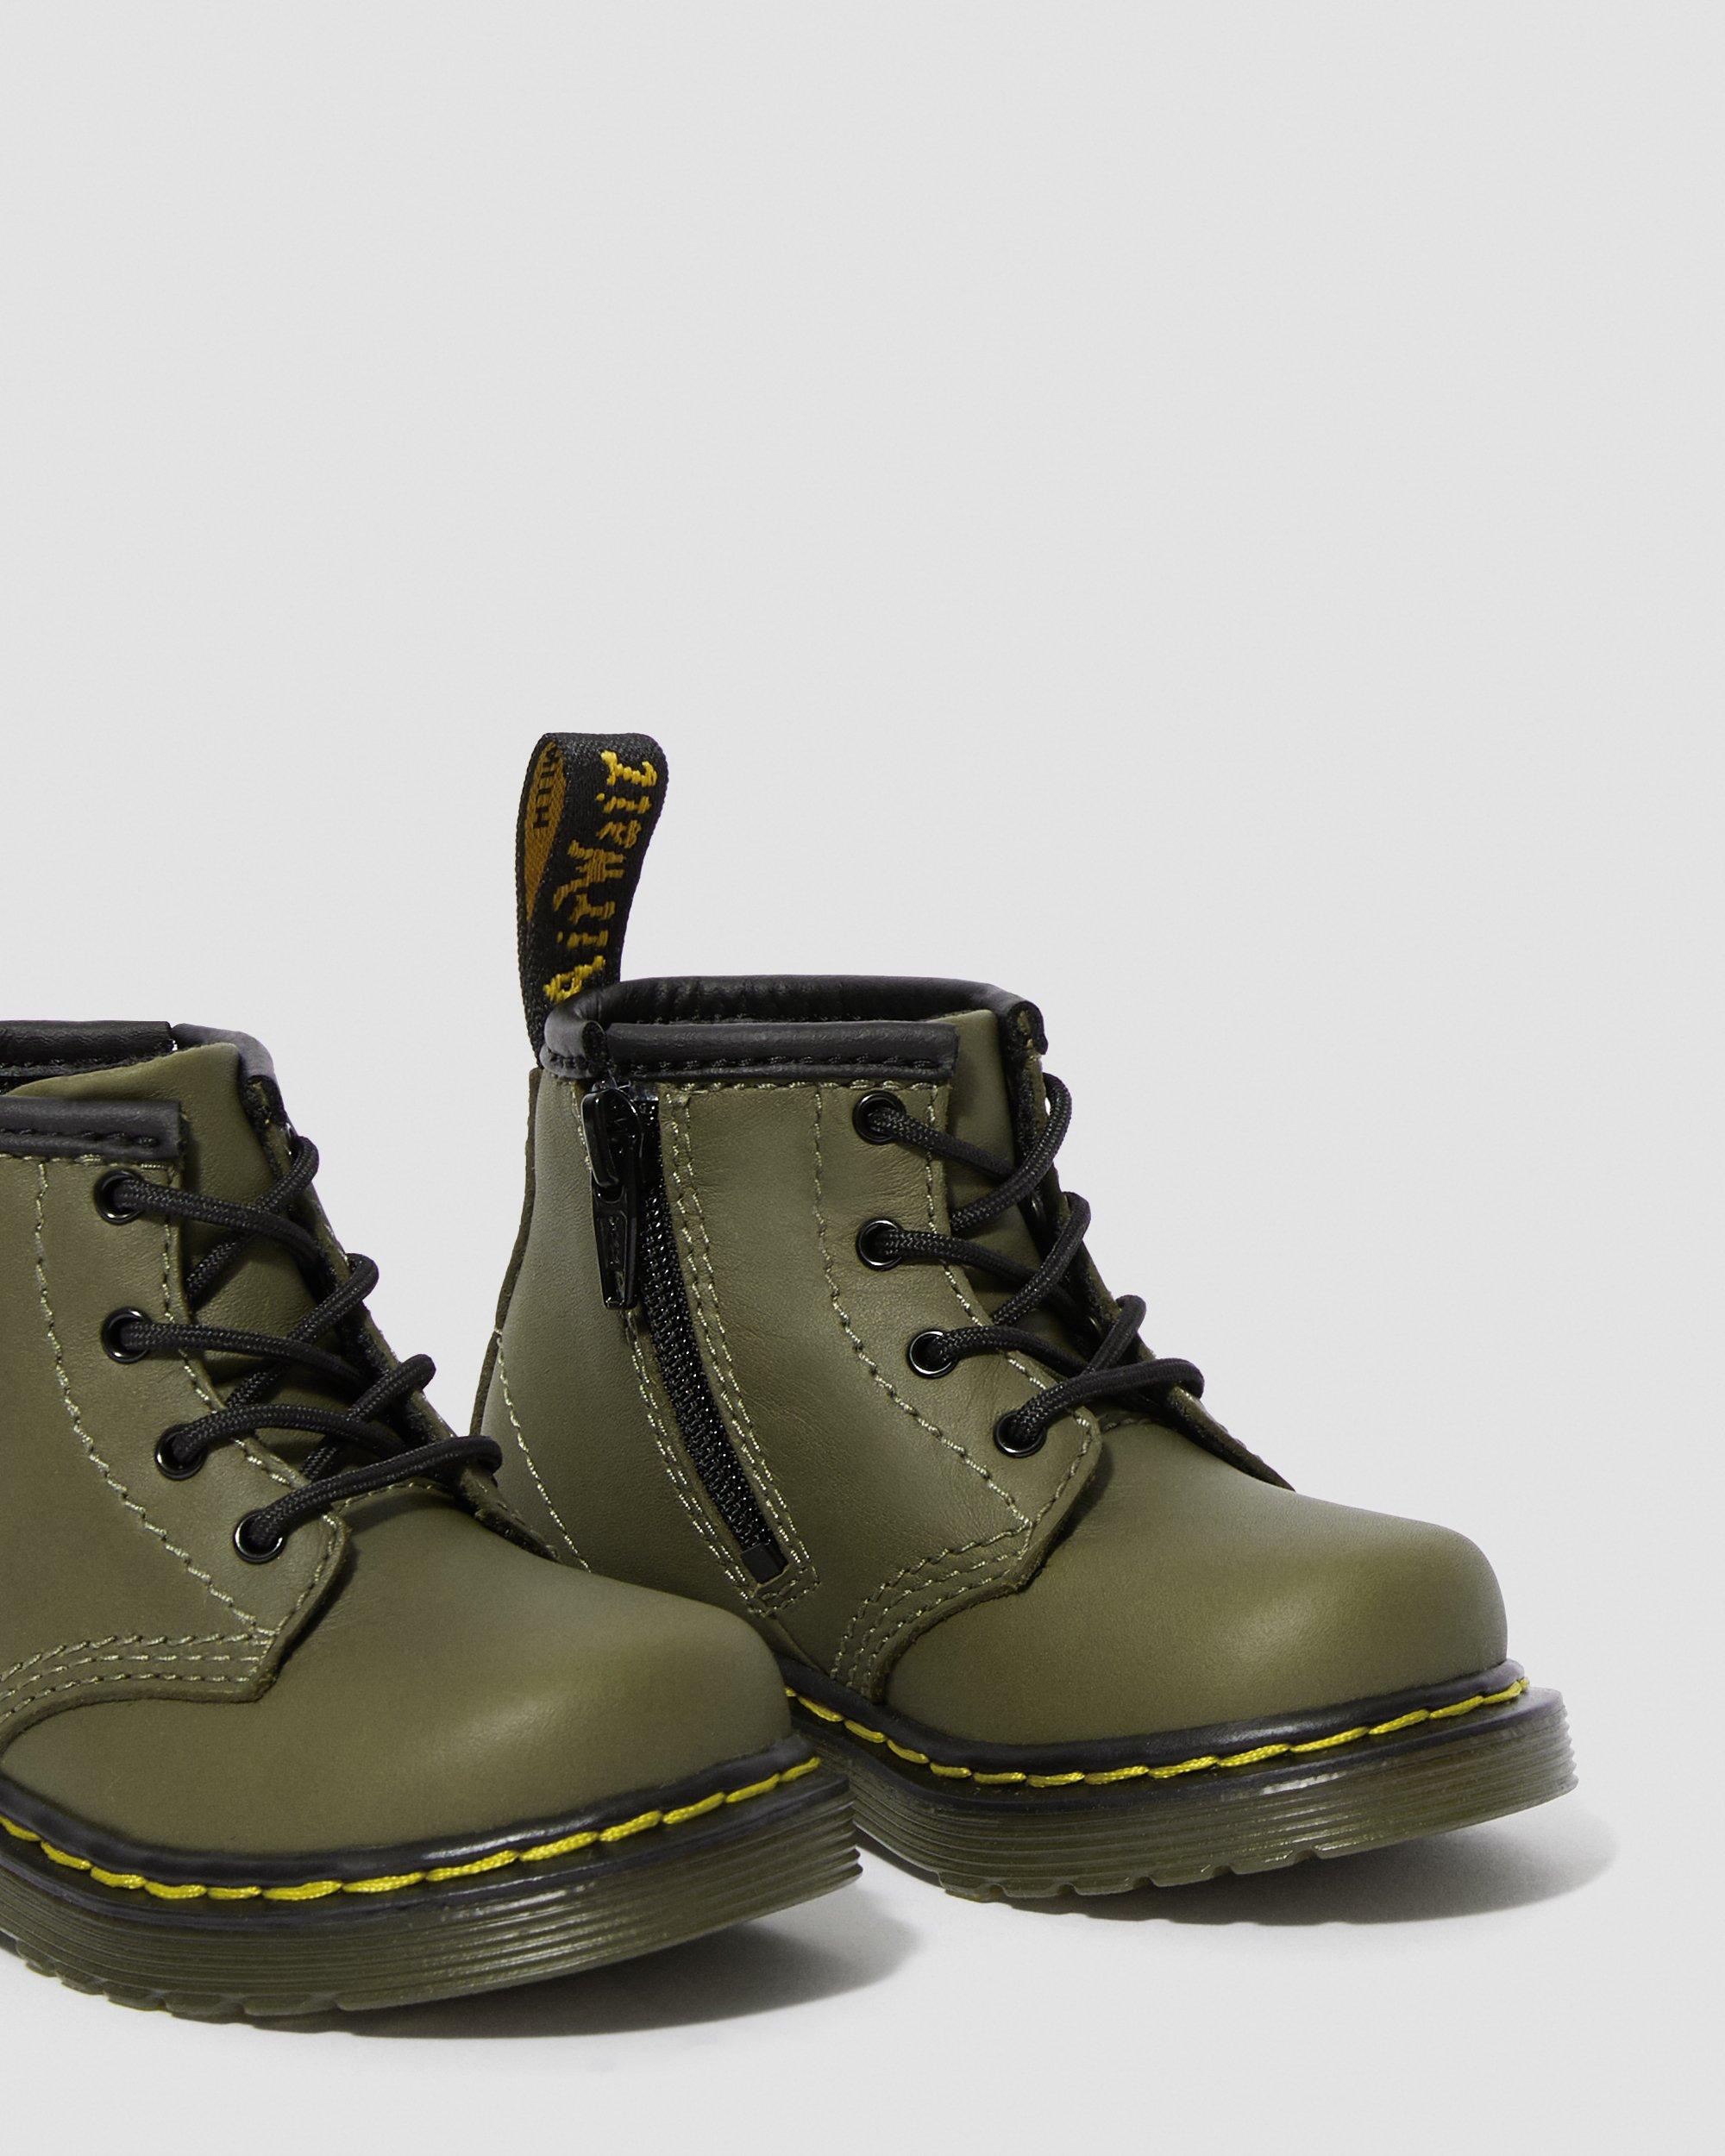 Infant 1460 Leather Lace Up Boots in Olive